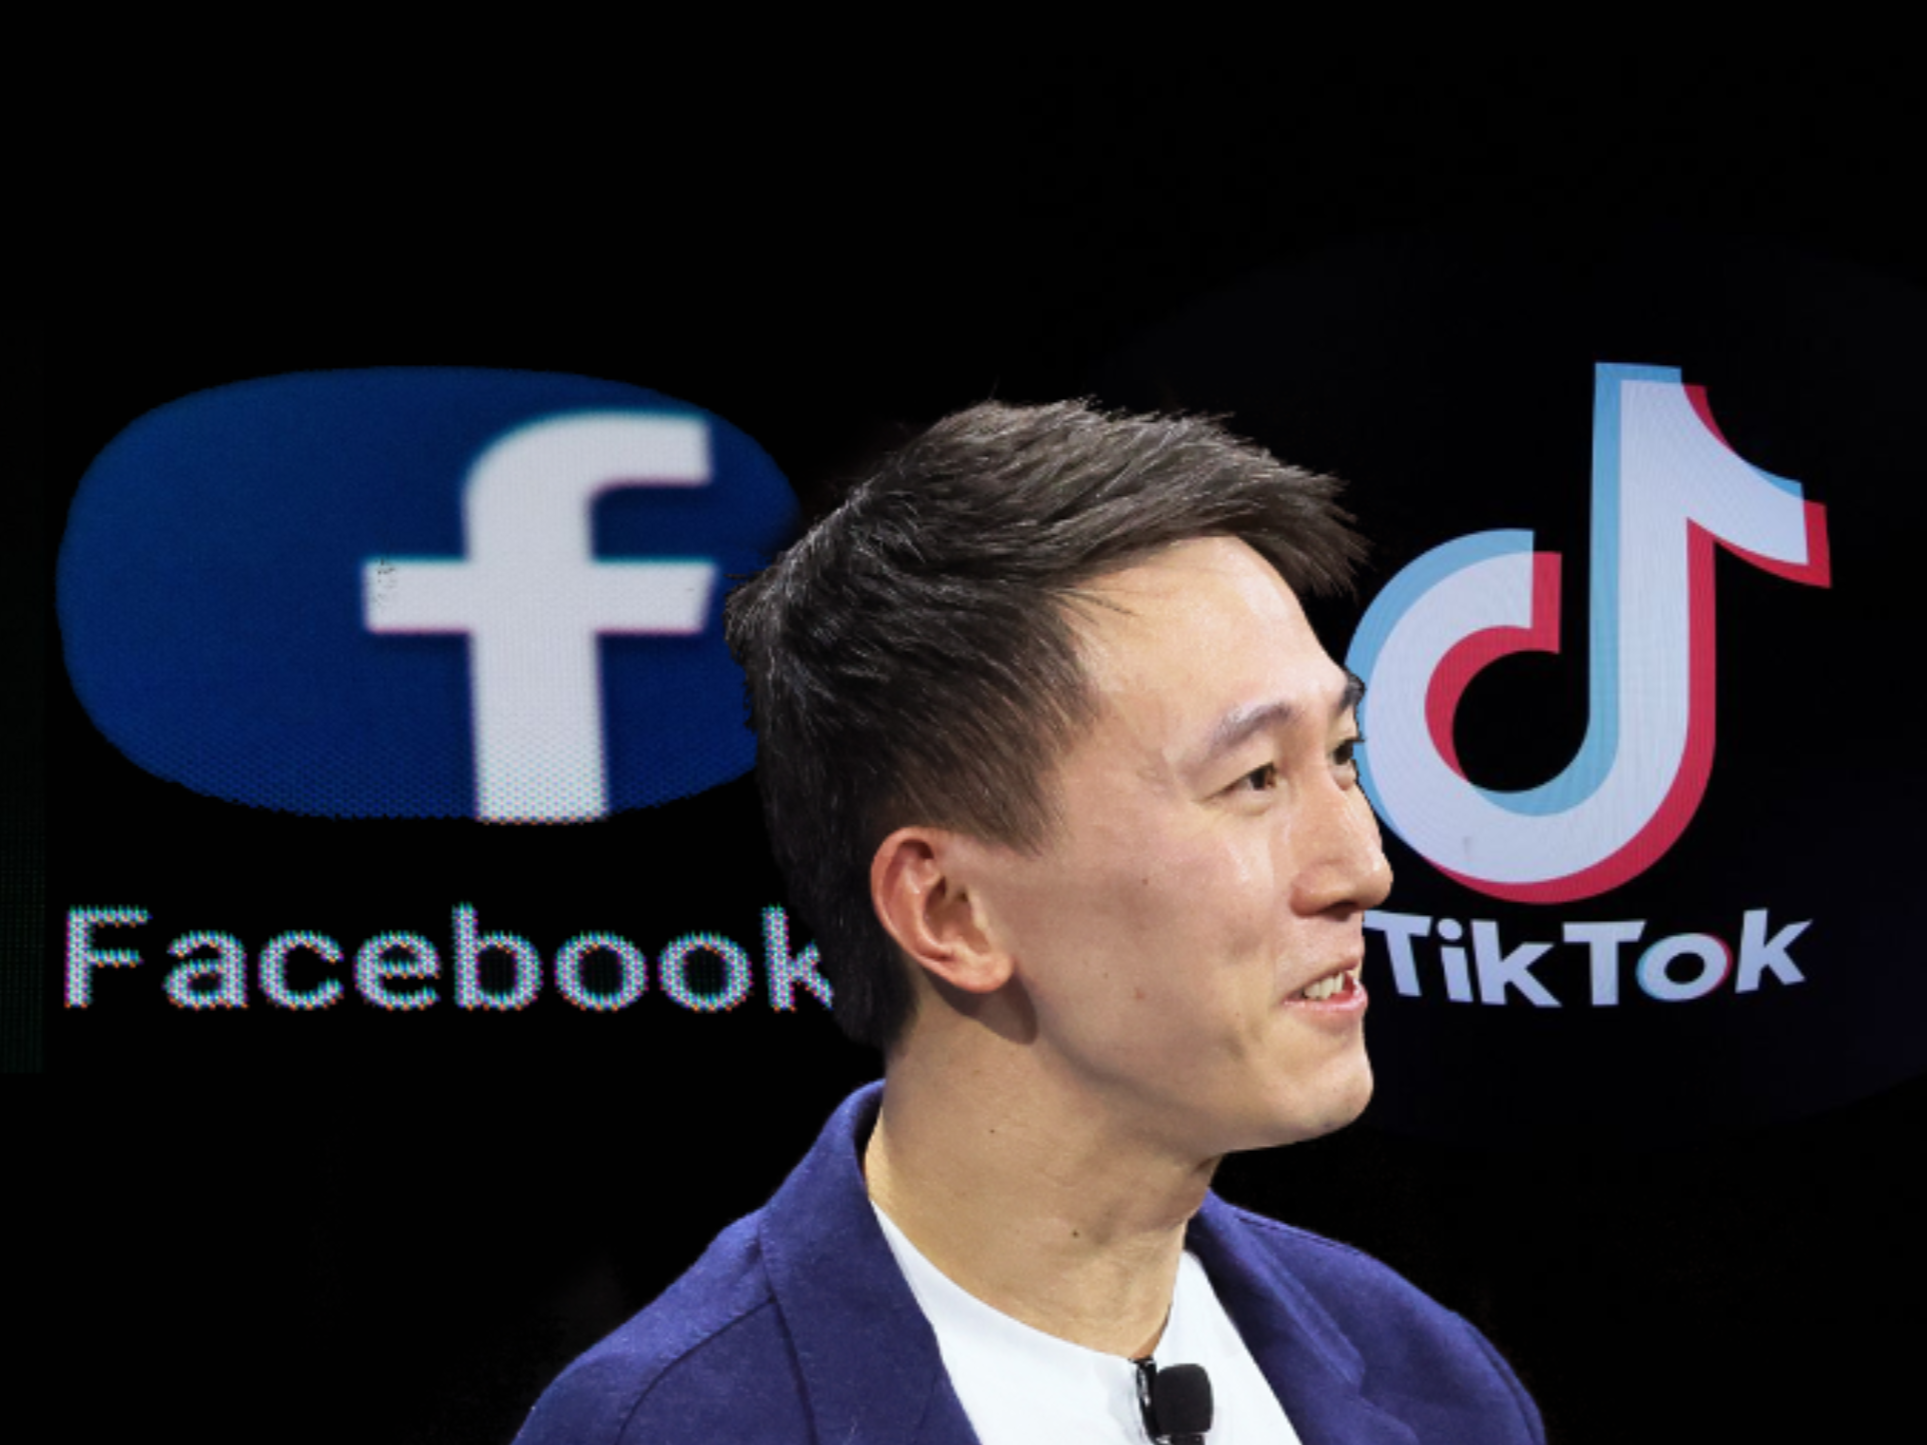 TikTok CEO Shou Chew worked as an intern at Facebook before heading the Chinese-owned rival